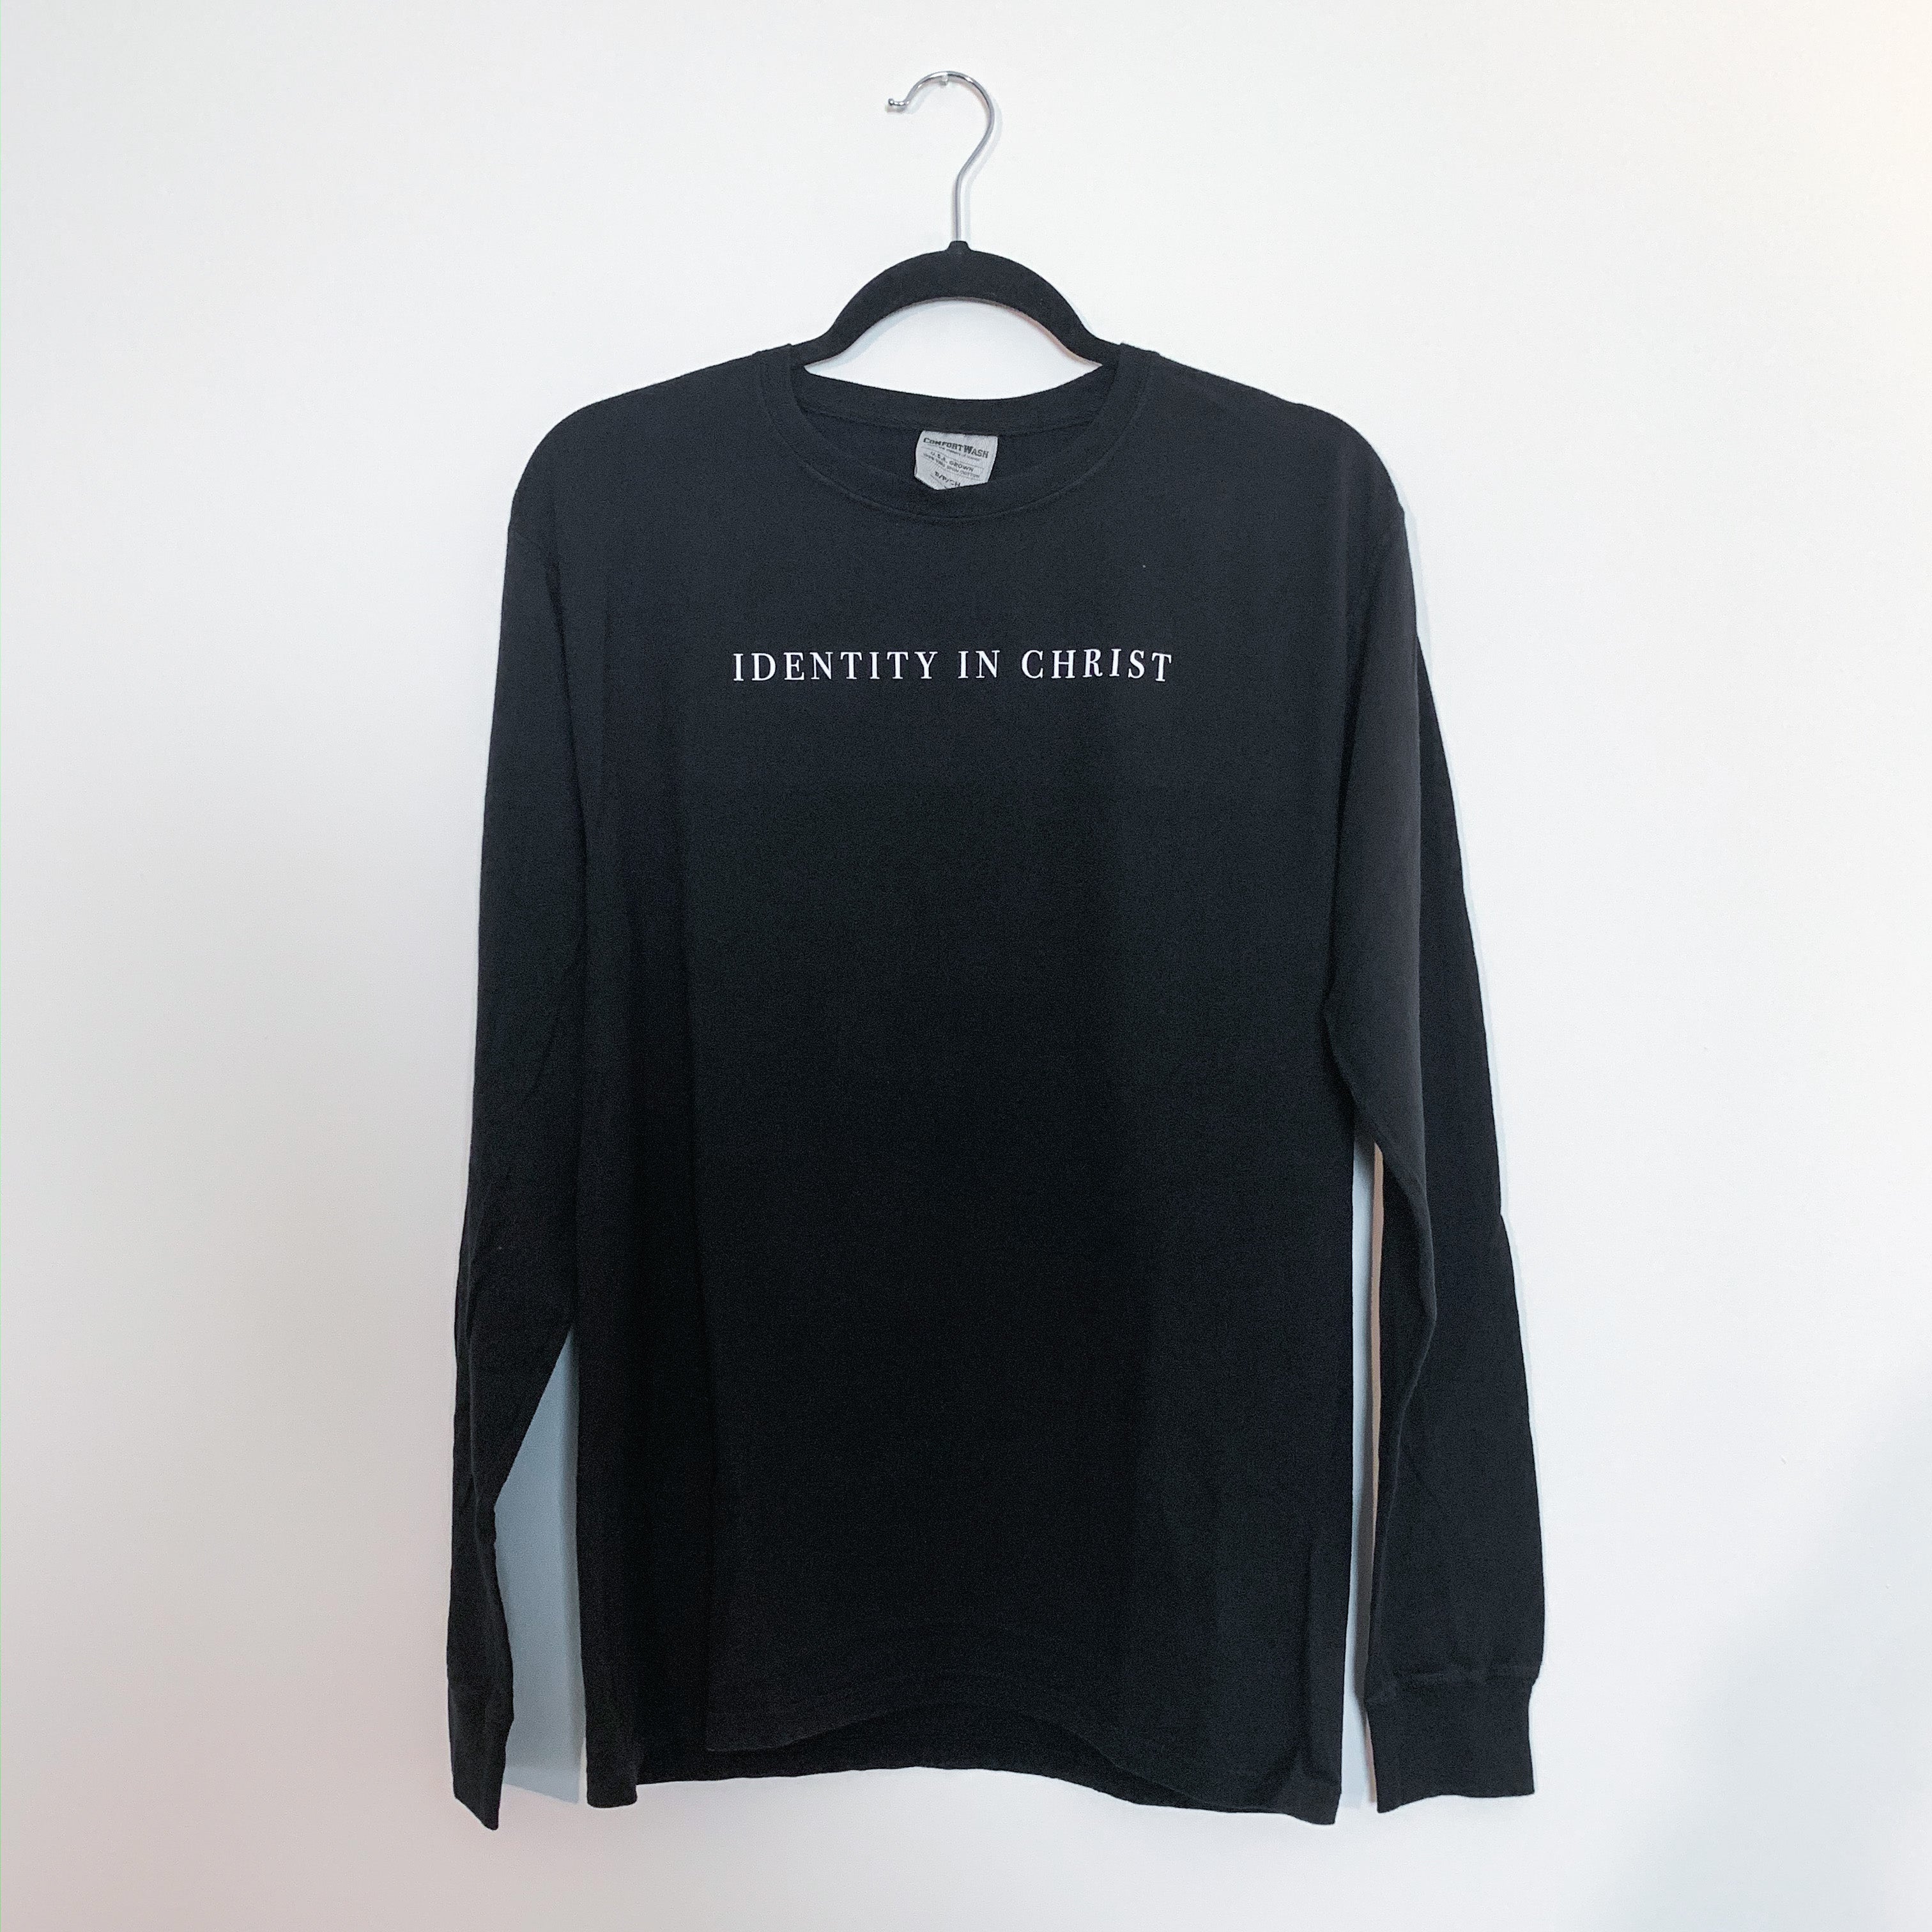 T-Shirt - LS - Small Words - Identity in Christ - Black